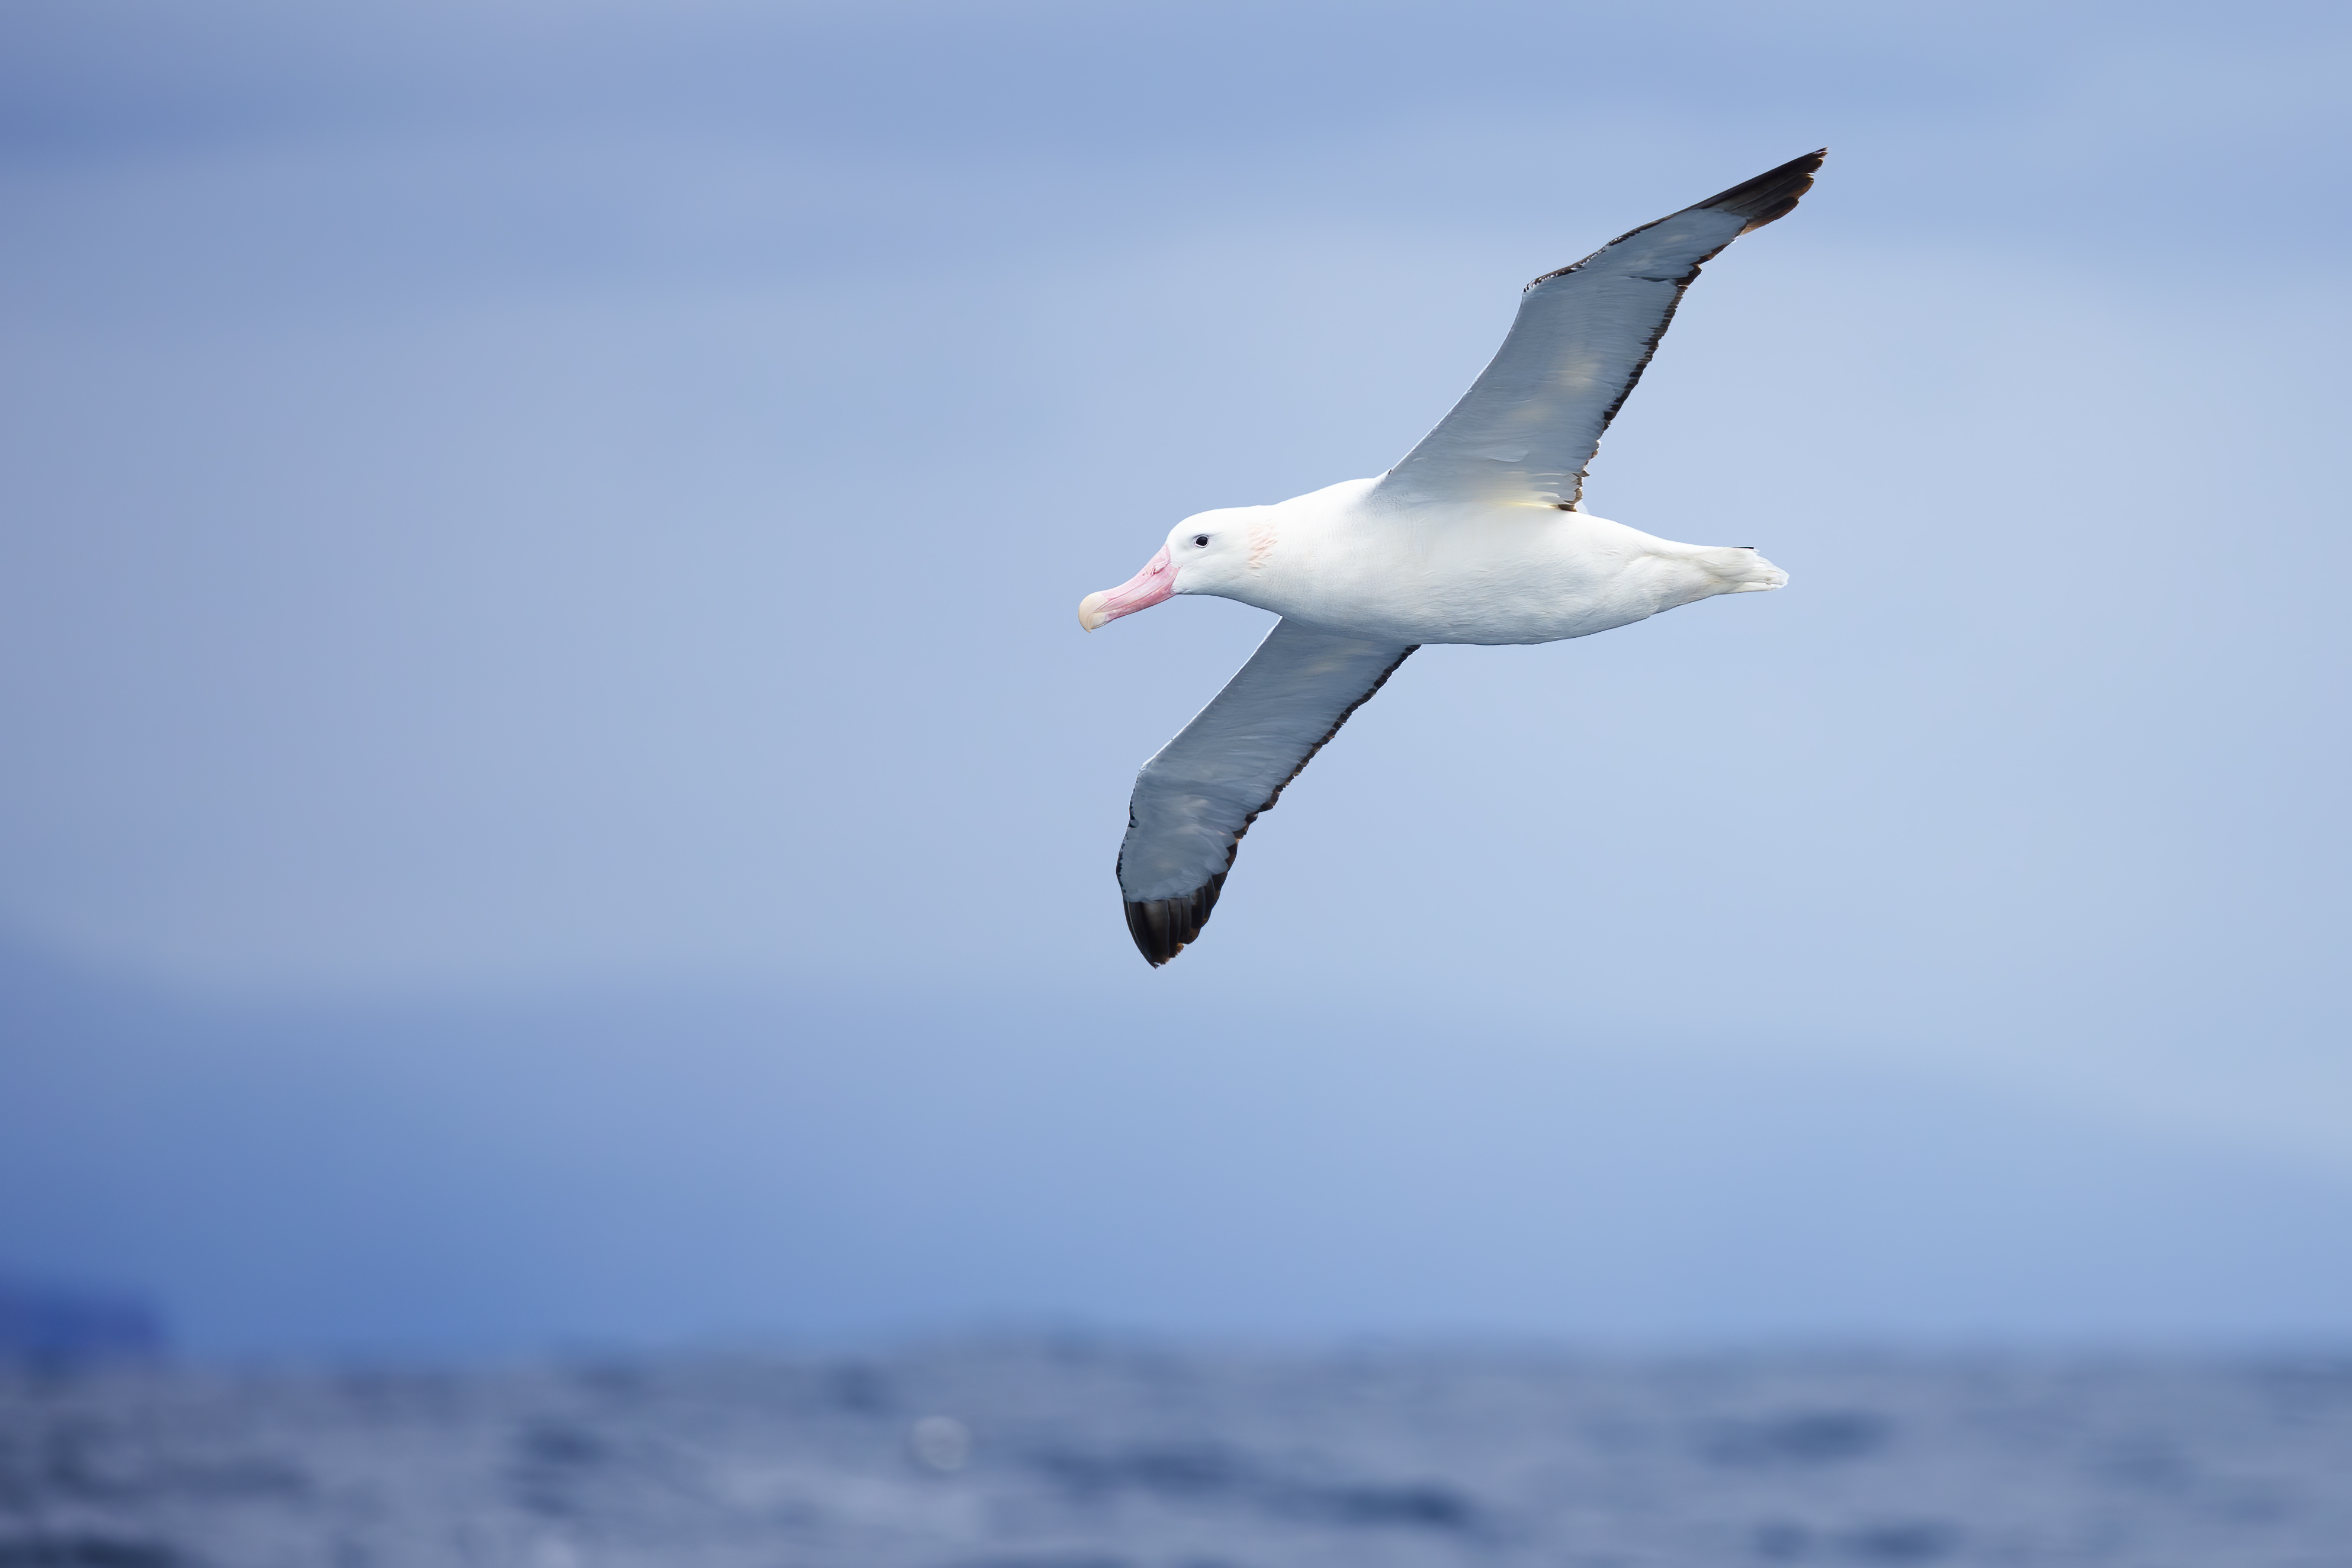 A majestic snowy albatross in flight over the Southern Ocean, showcasing its impressive wingspan and elegant white plumage. Image Credit: JJ Harrison, WikiCommons.